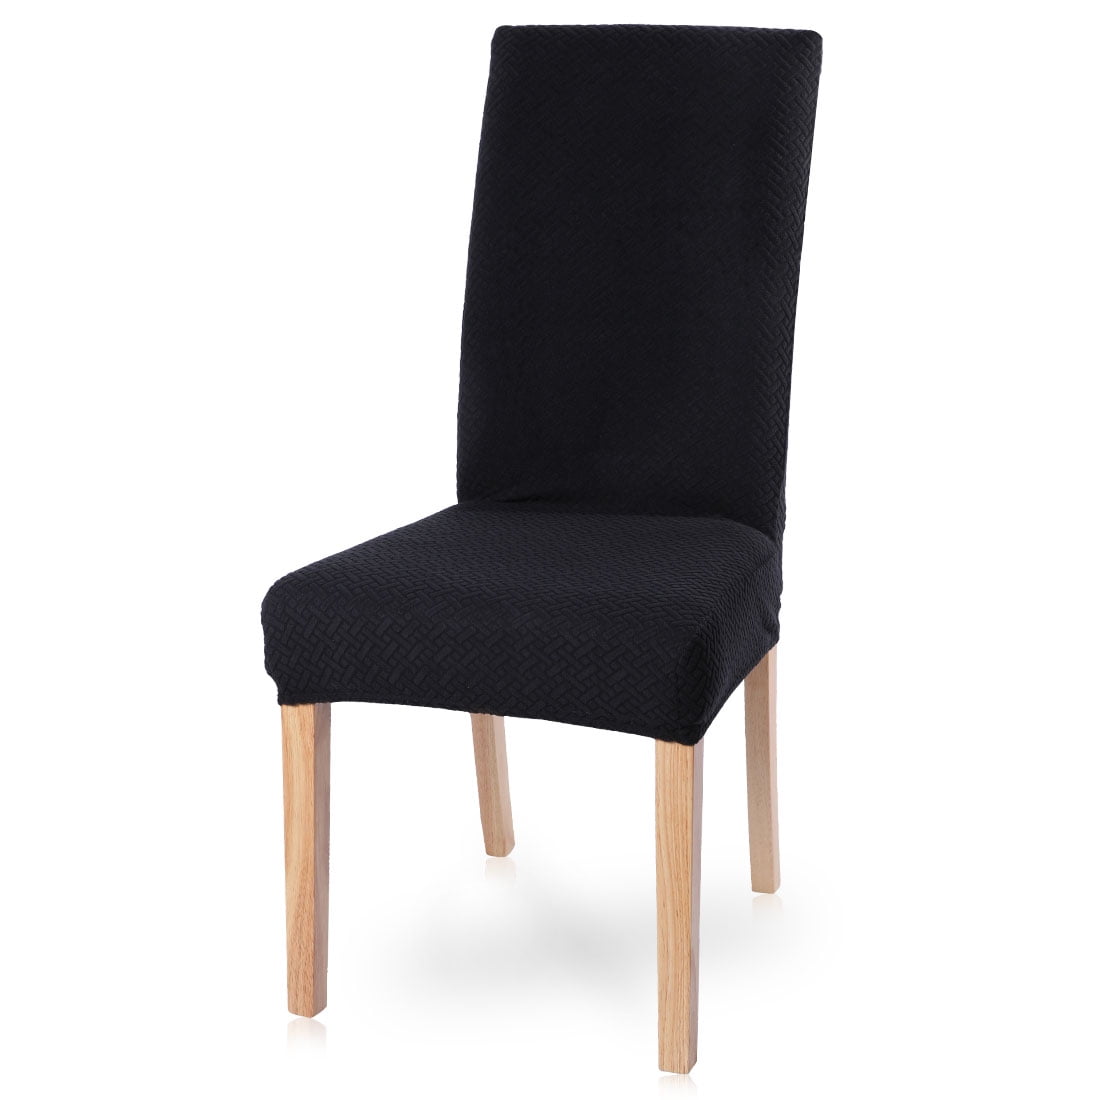 Hechting overschot Teken een foto SEARCHI 1Pcs Removable Washable Seat Cover Dining Chair Cover - Walmart.com